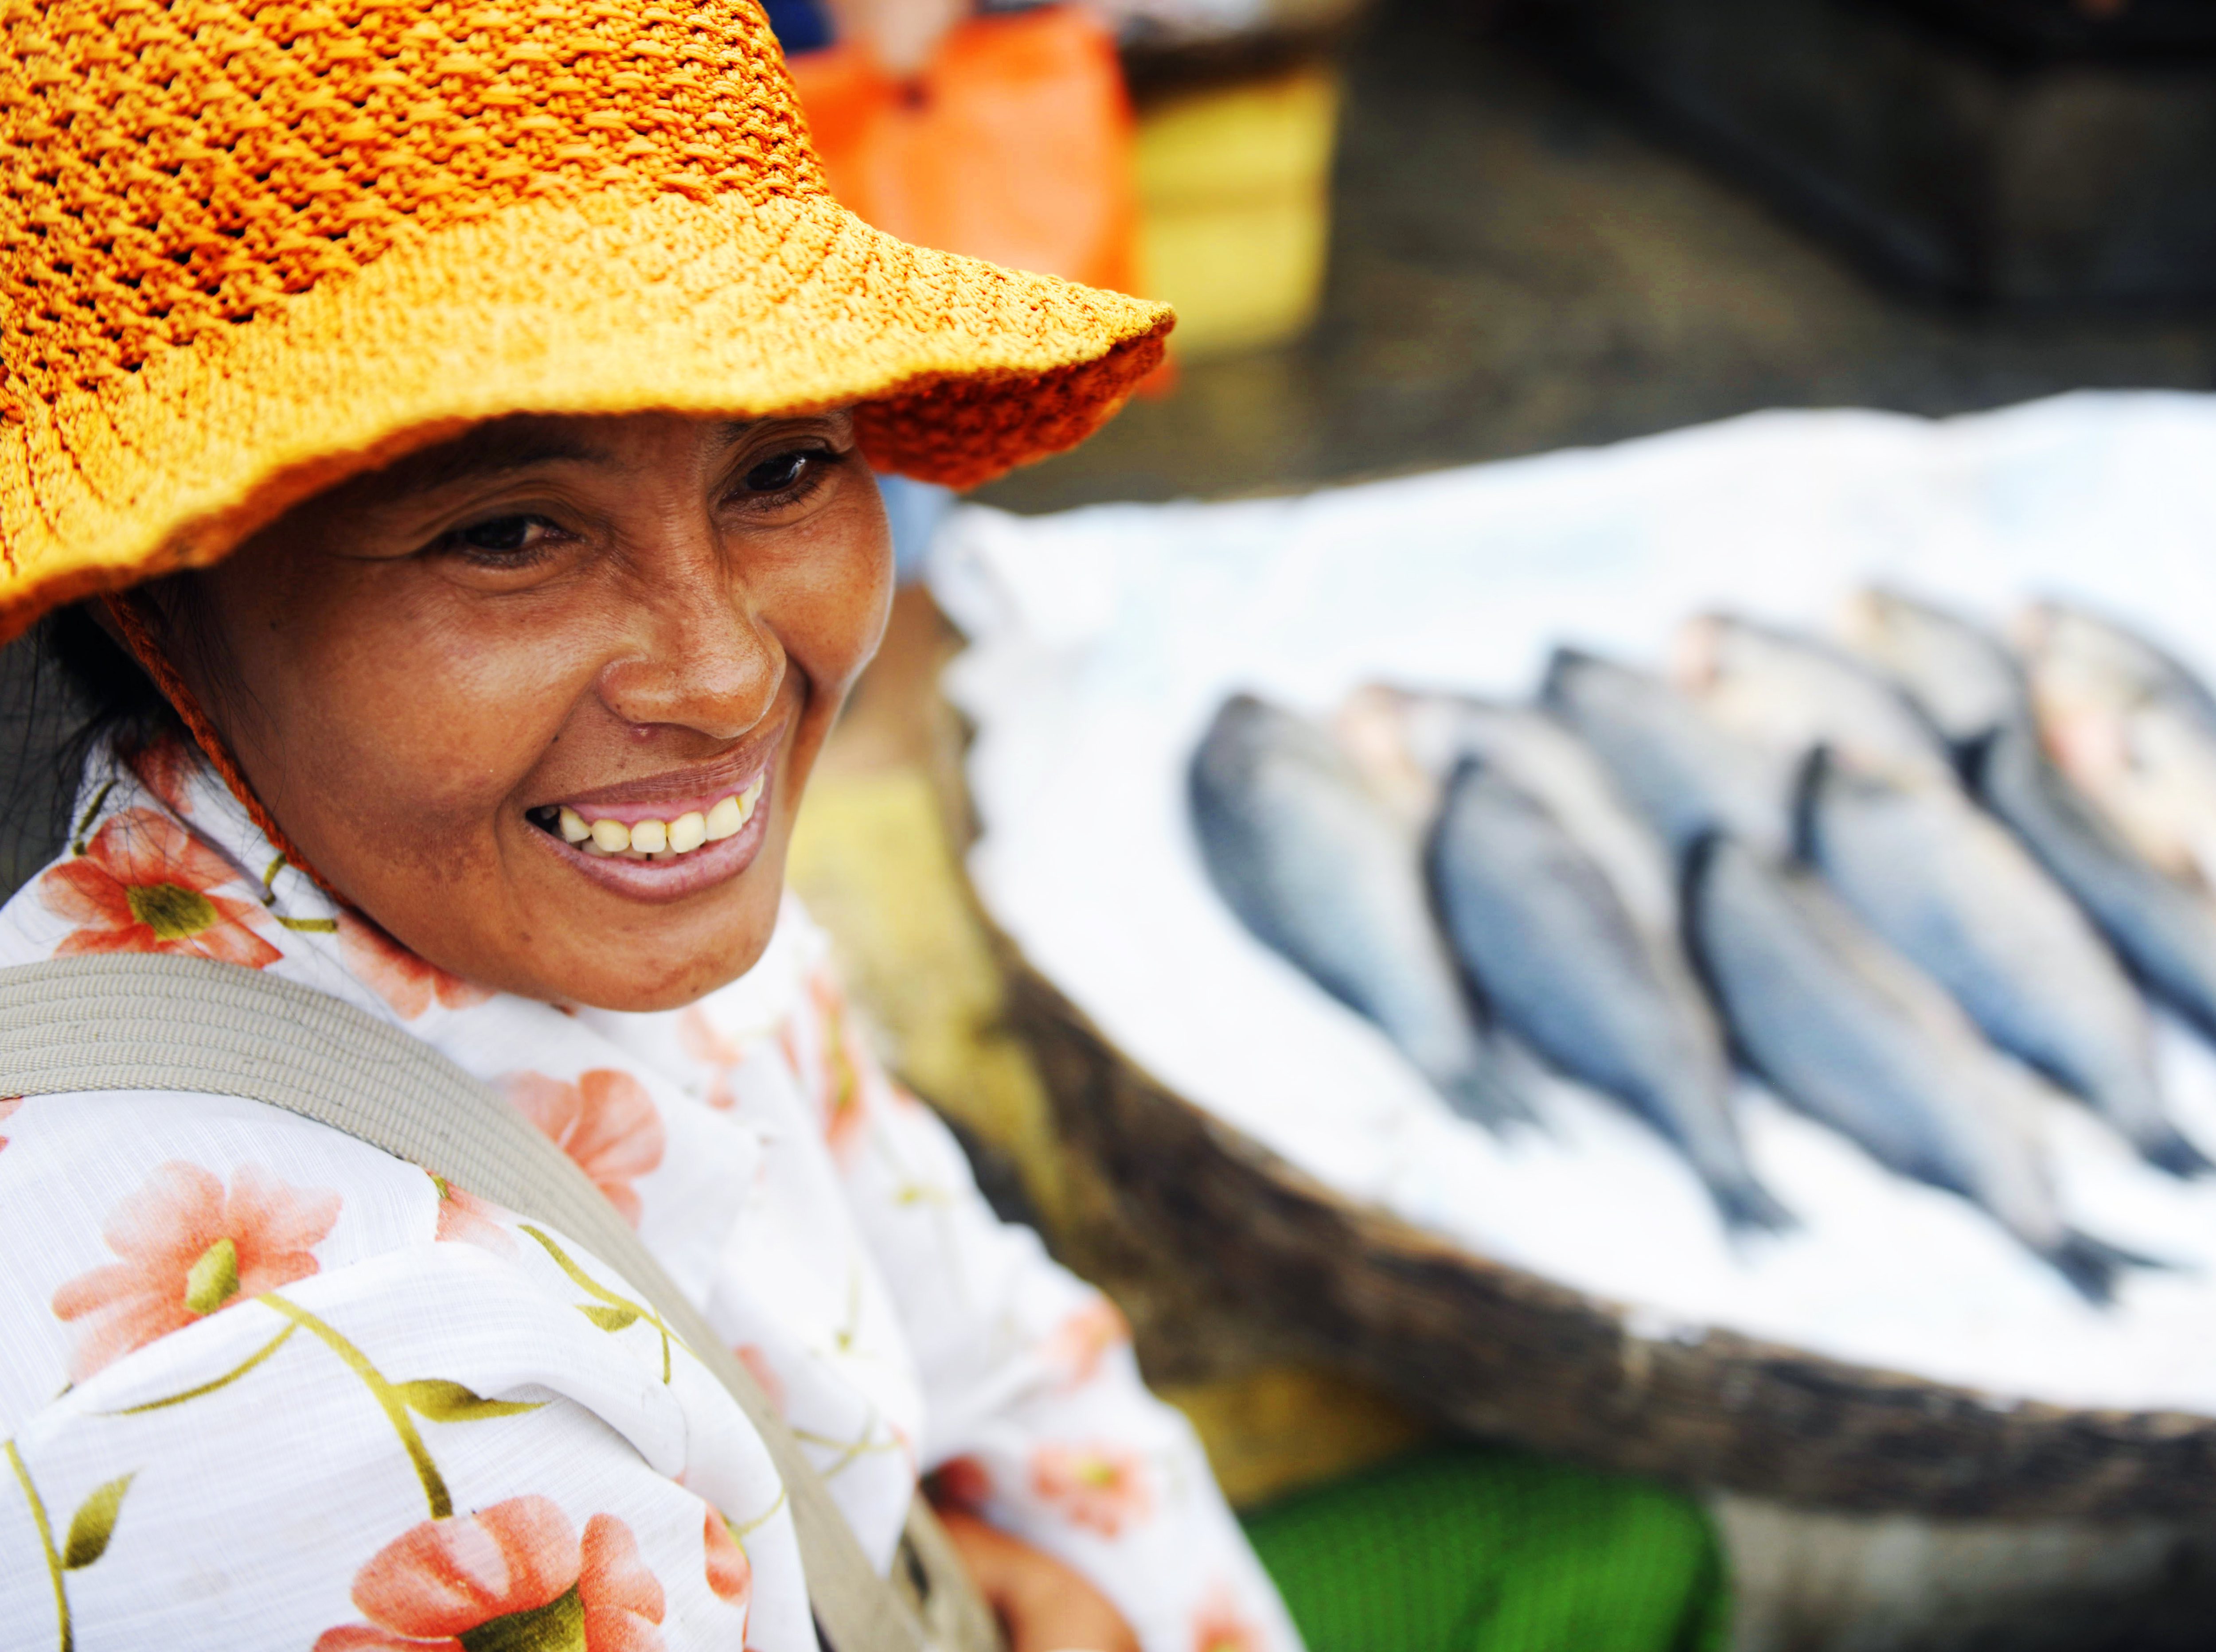 lady in front of fish at market